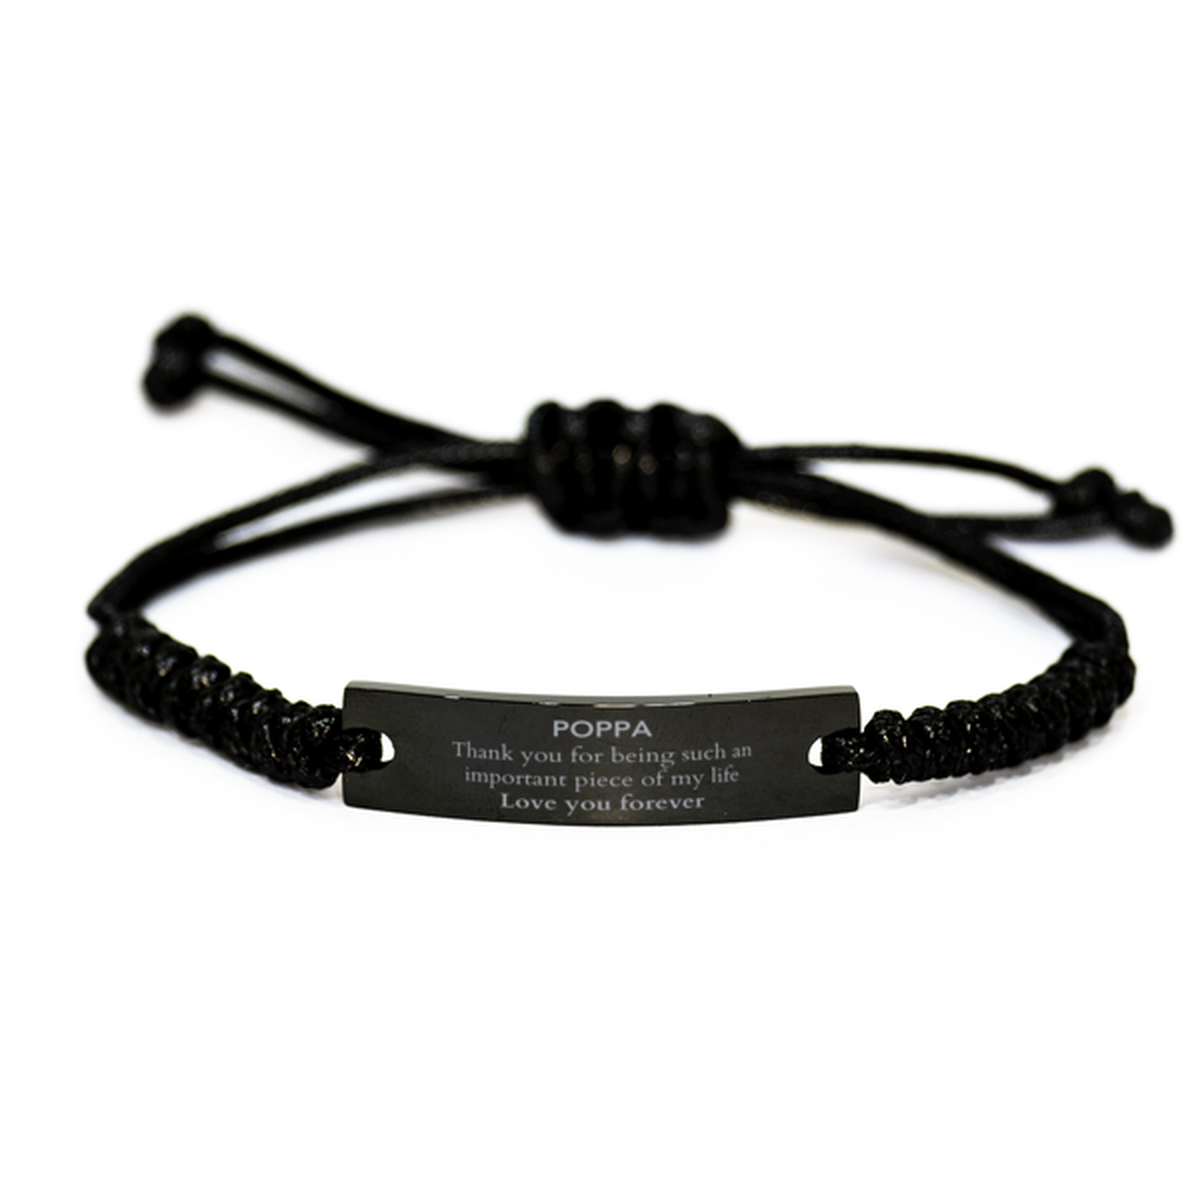 Appropriate Poppa Black Rope Bracelet Epic Birthday Gifts for Poppa Thank you for being such an important piece of my life Poppa Christmas Mothers Fathers Day